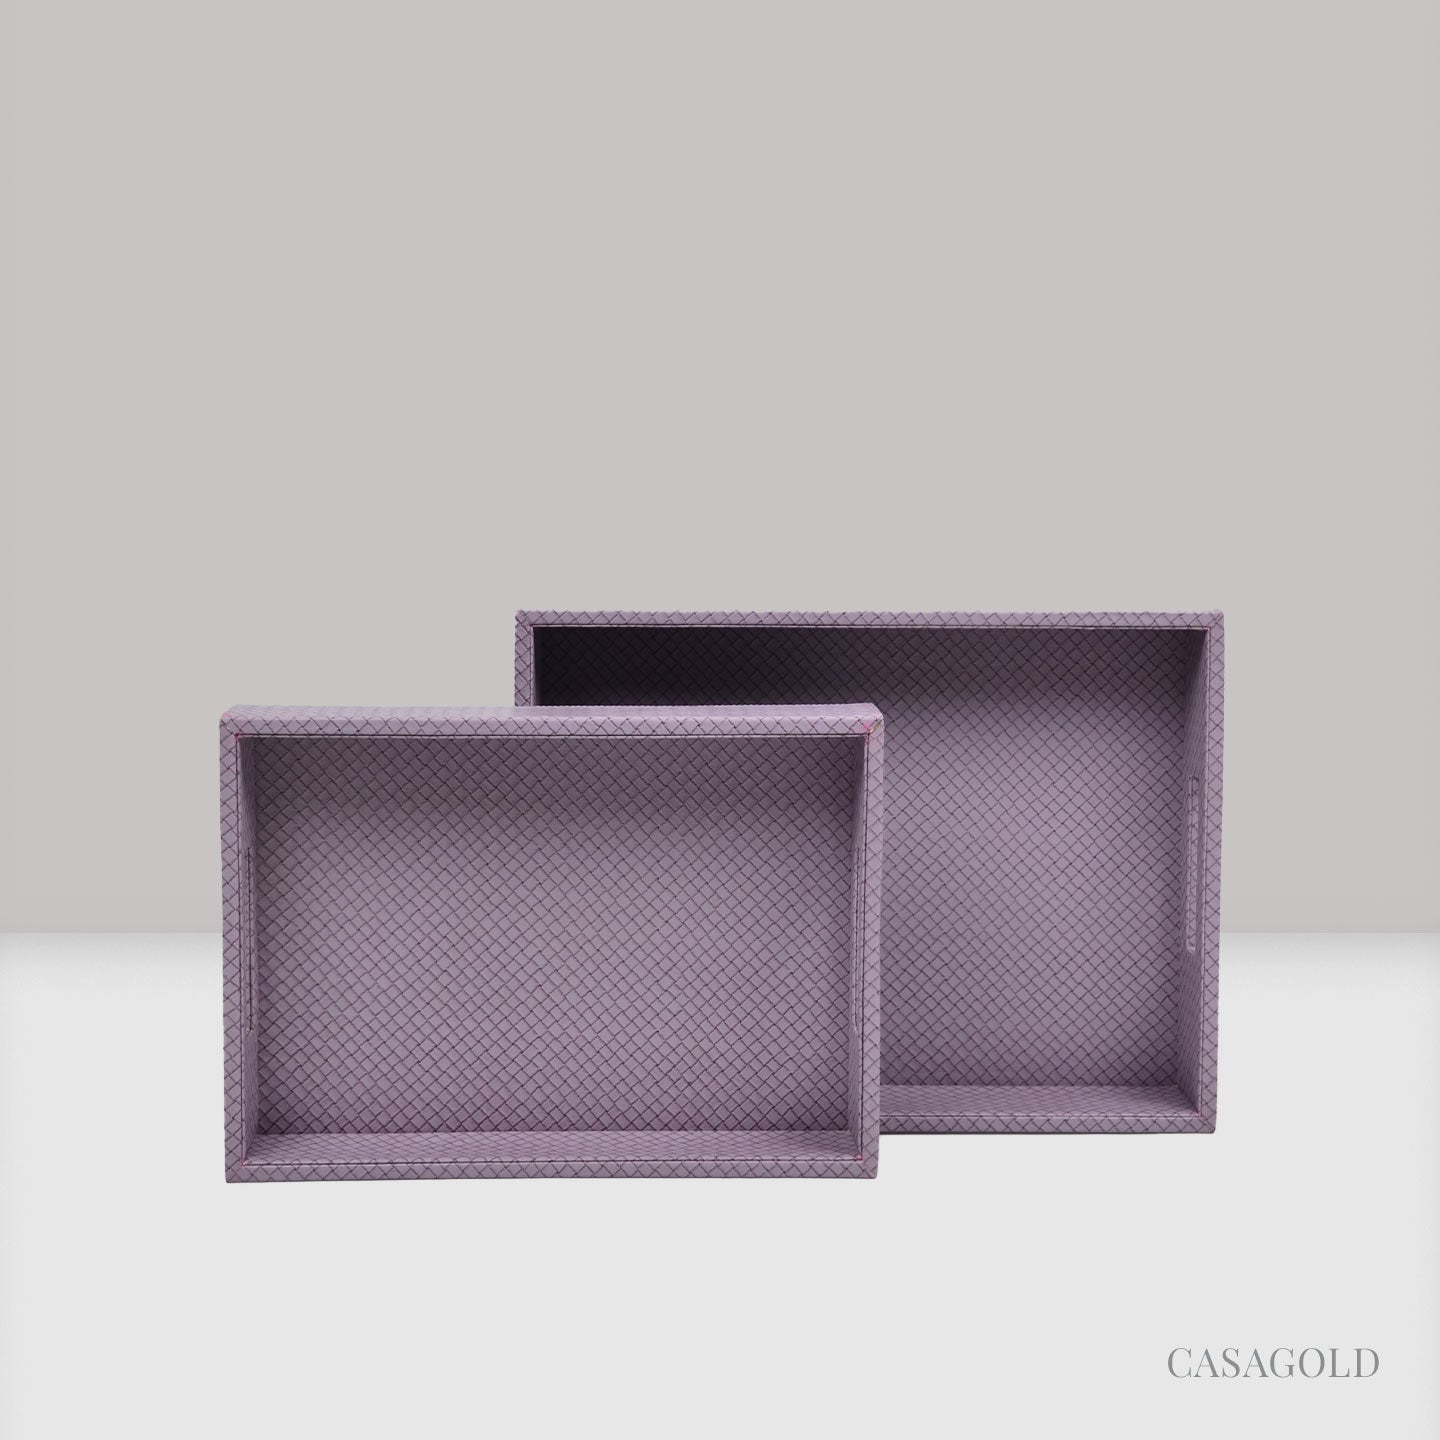 Lavender Leather Tray - Set of 2